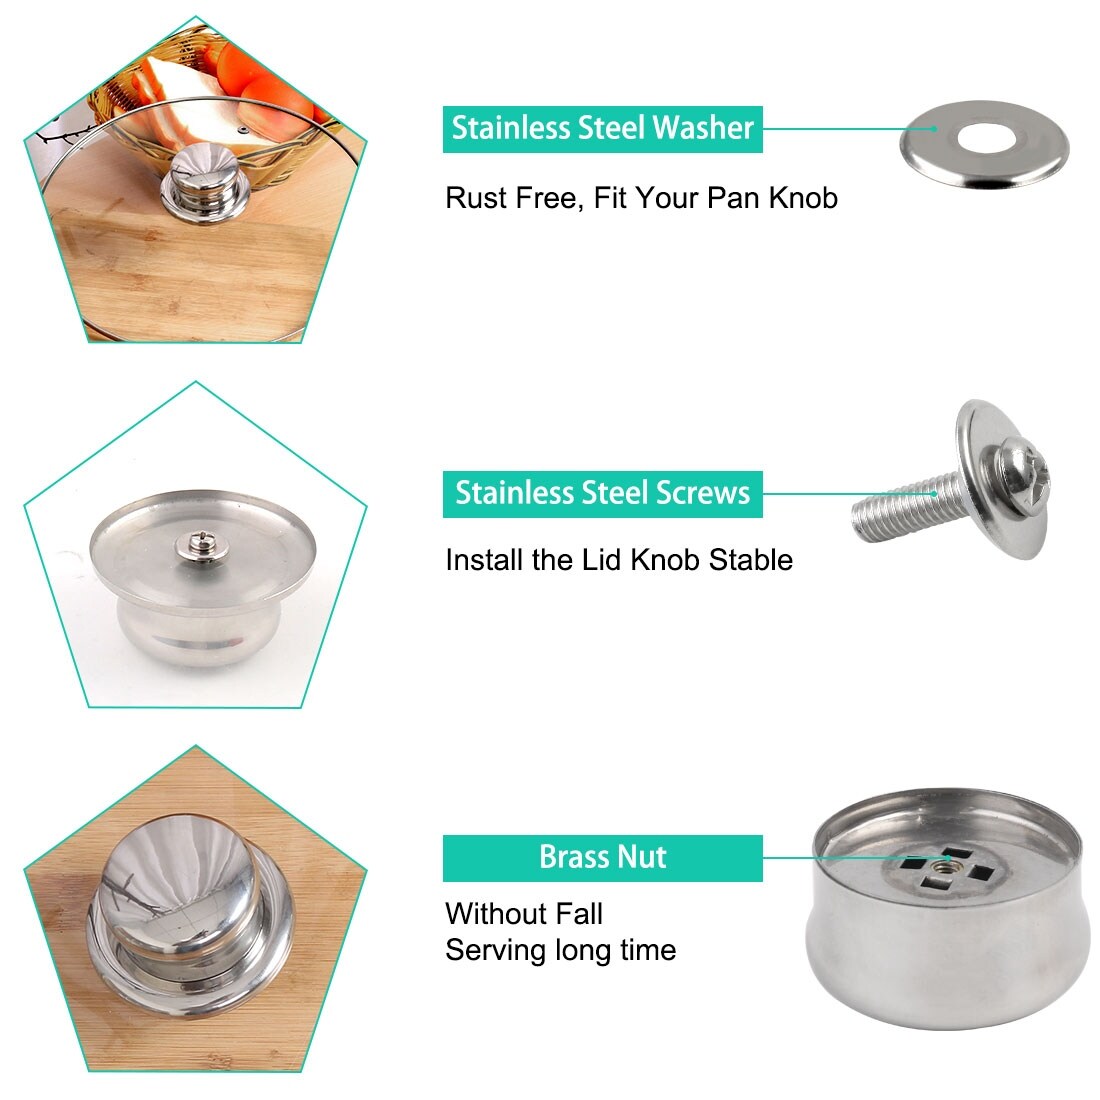 https://ak1.ostkcdn.com/images/products/is/images/direct/f54ea2eacc430e6e2b8cee792872f1ea3bfe29fe/Stainless-Steel-Pan-Pot-Lid-Knob-Universal-Kitchen-Cookware-Cover-Replacement.jpg